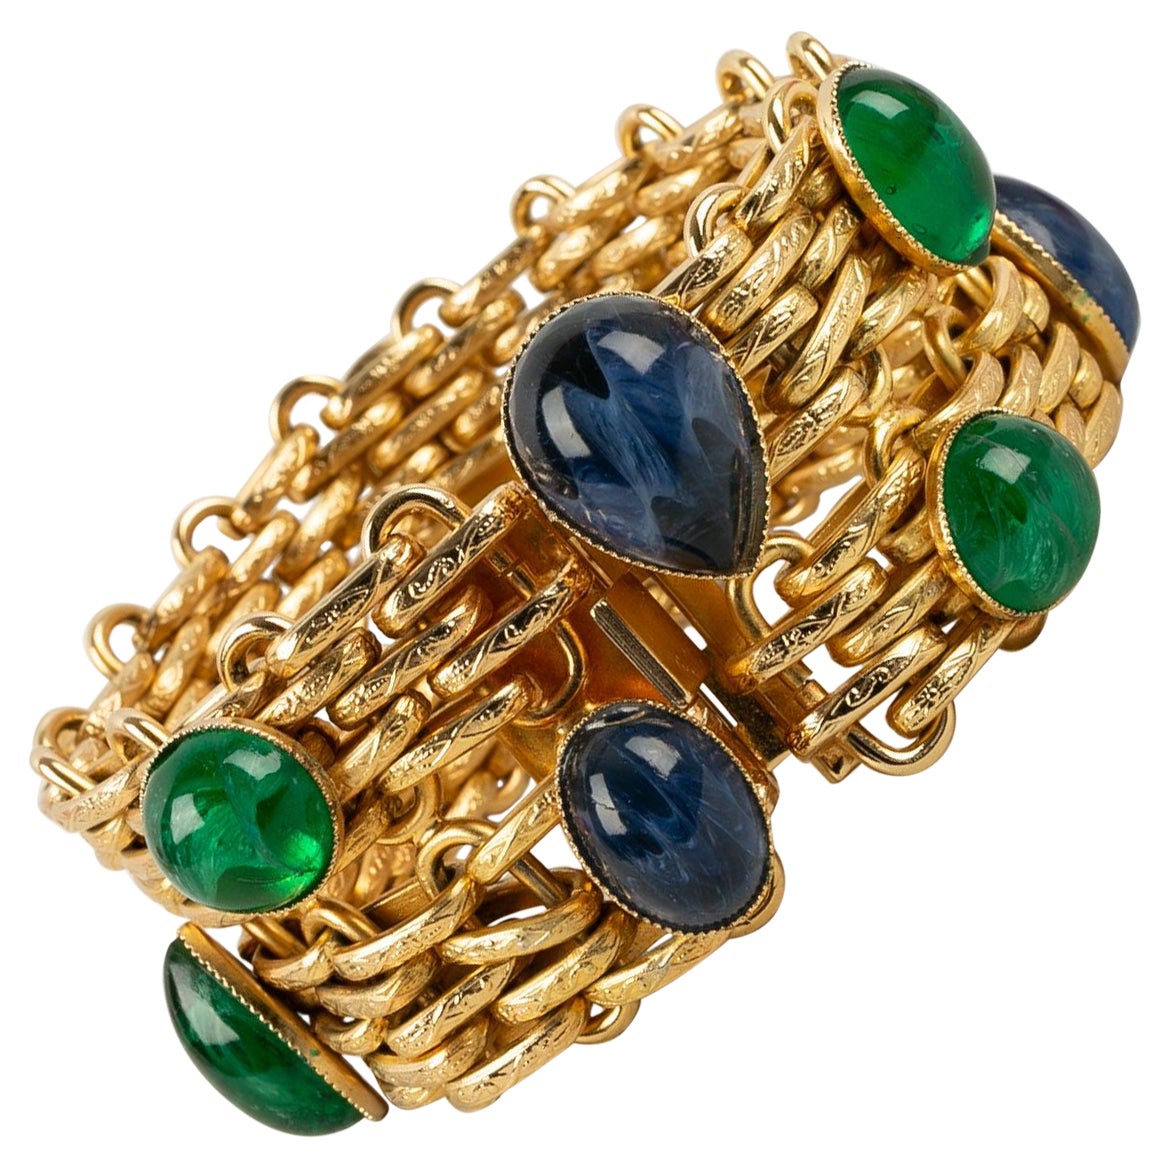 Christian Dior Bracelet in Golden Metal with Cabochons in Glass Paste